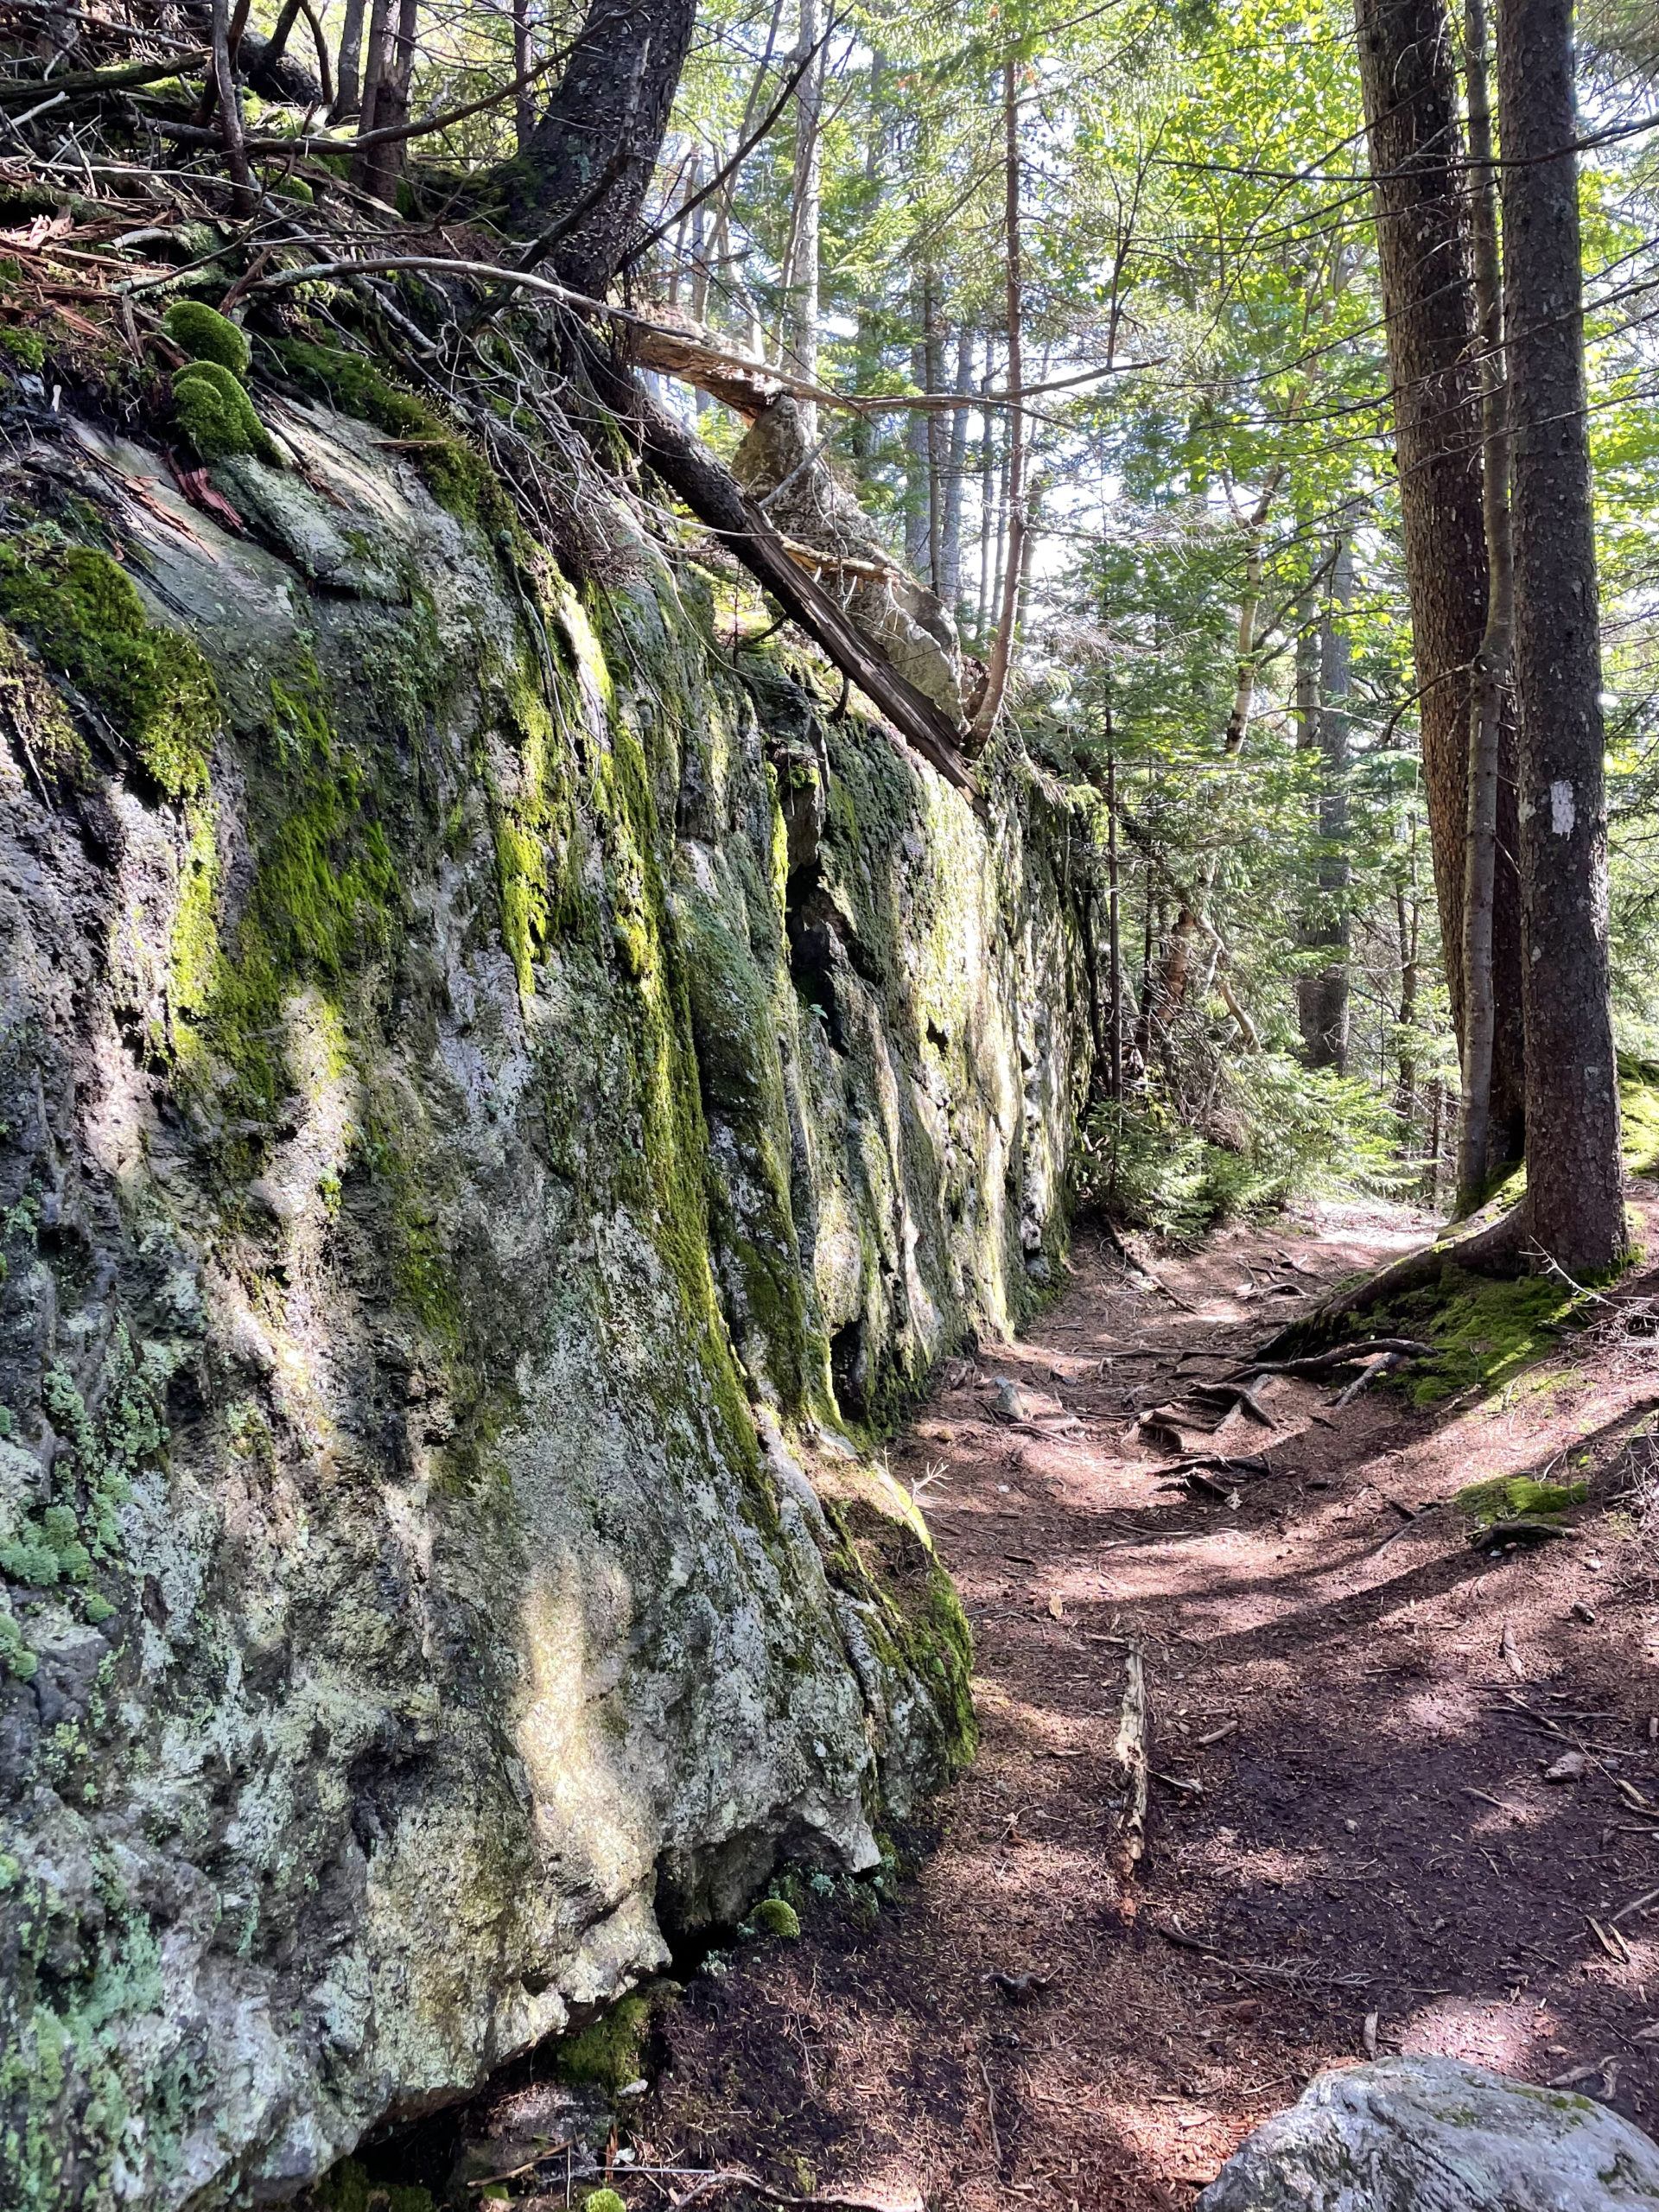 Boulder-sided trail, seen while hiking Bigelow Mountain in Western Maine